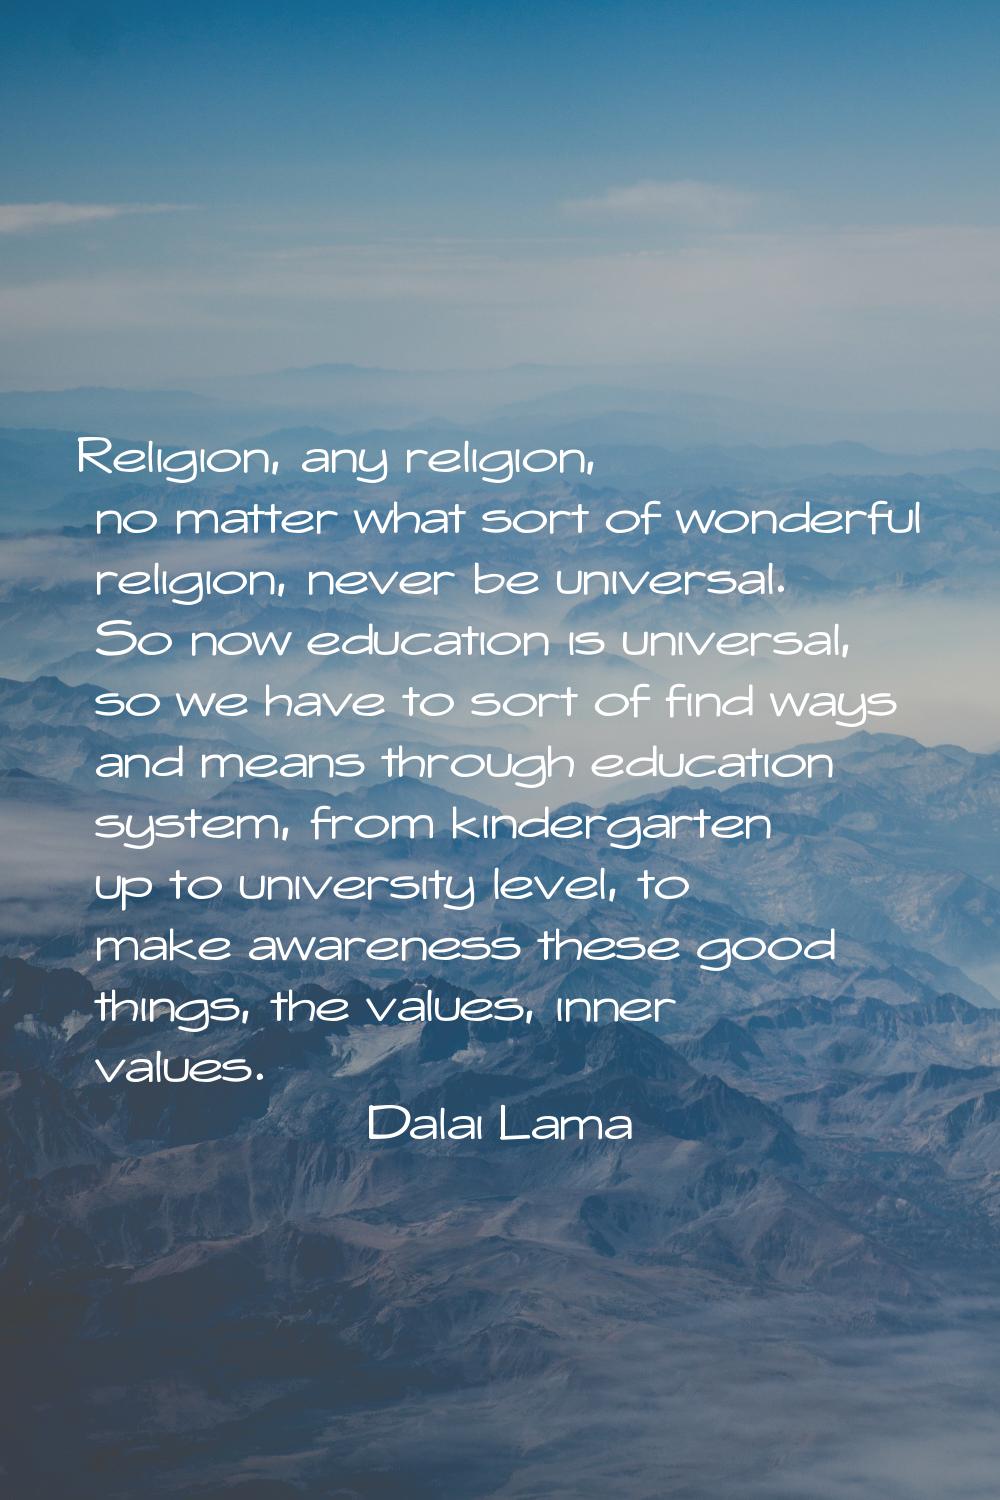 Religion, any religion, no matter what sort of wonderful religion, never be universal. So now educa